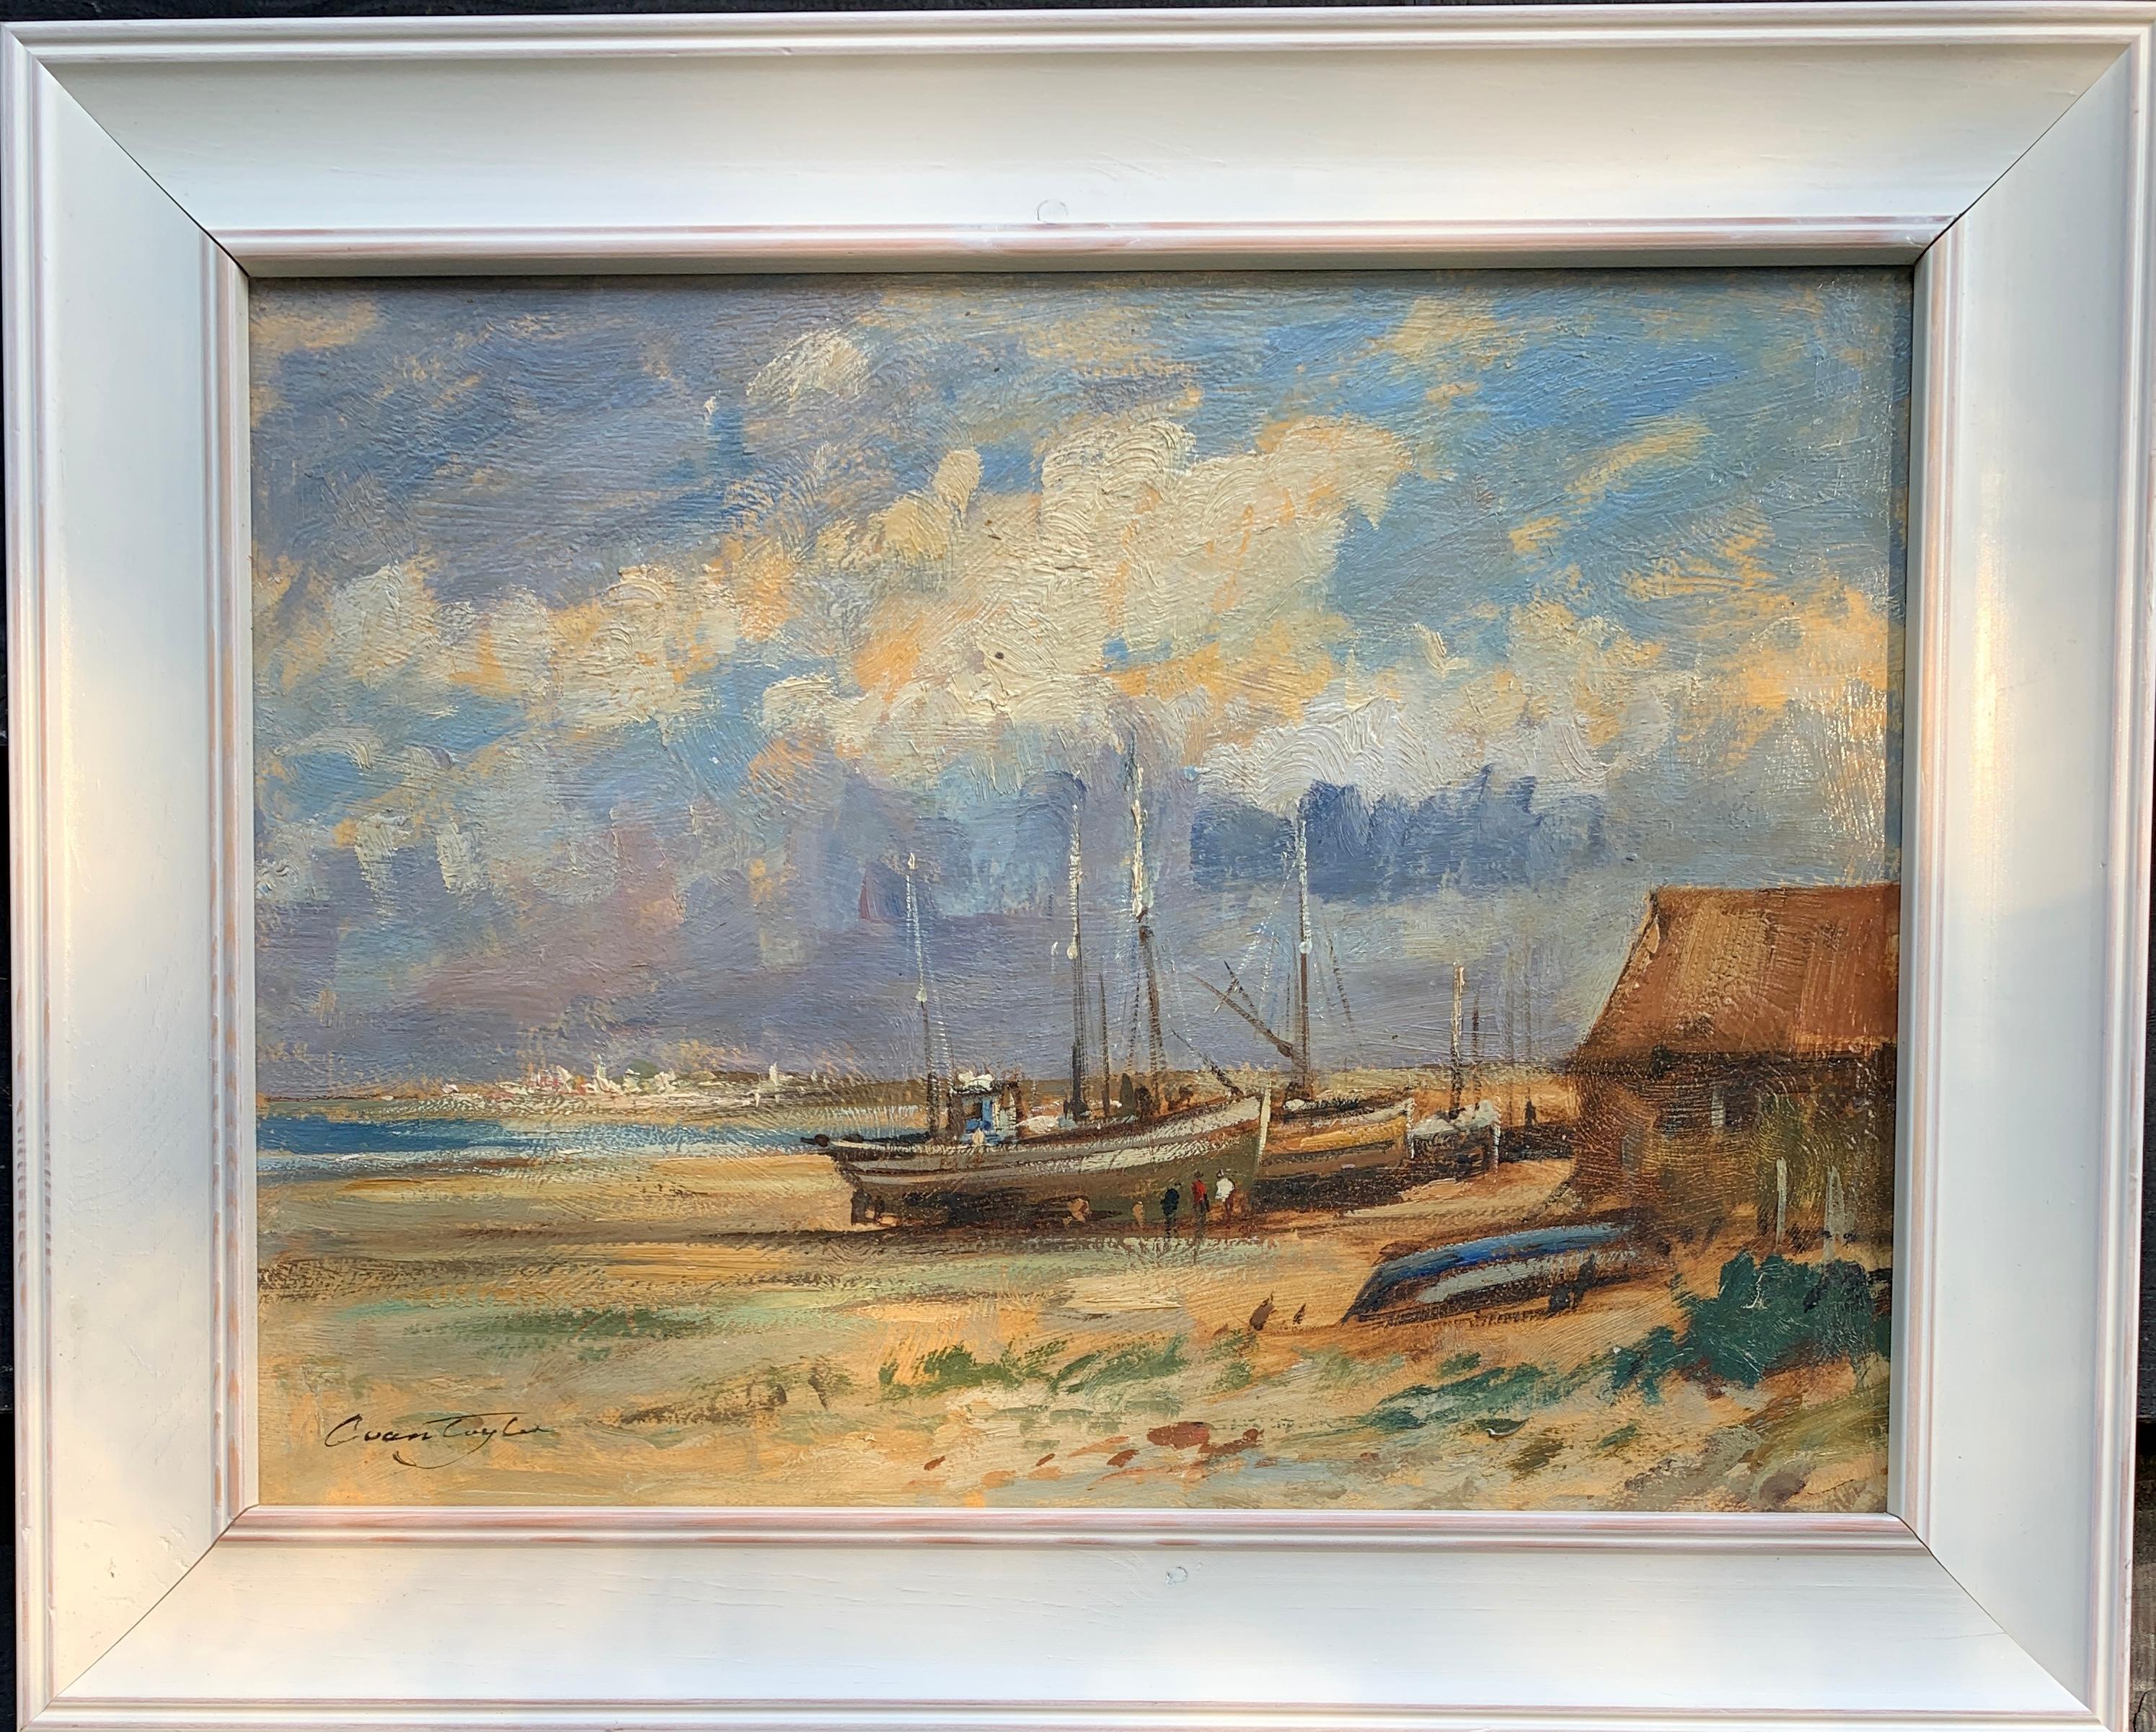 English Impressionist beach, shore scene with fishing boats, huts and landscape 